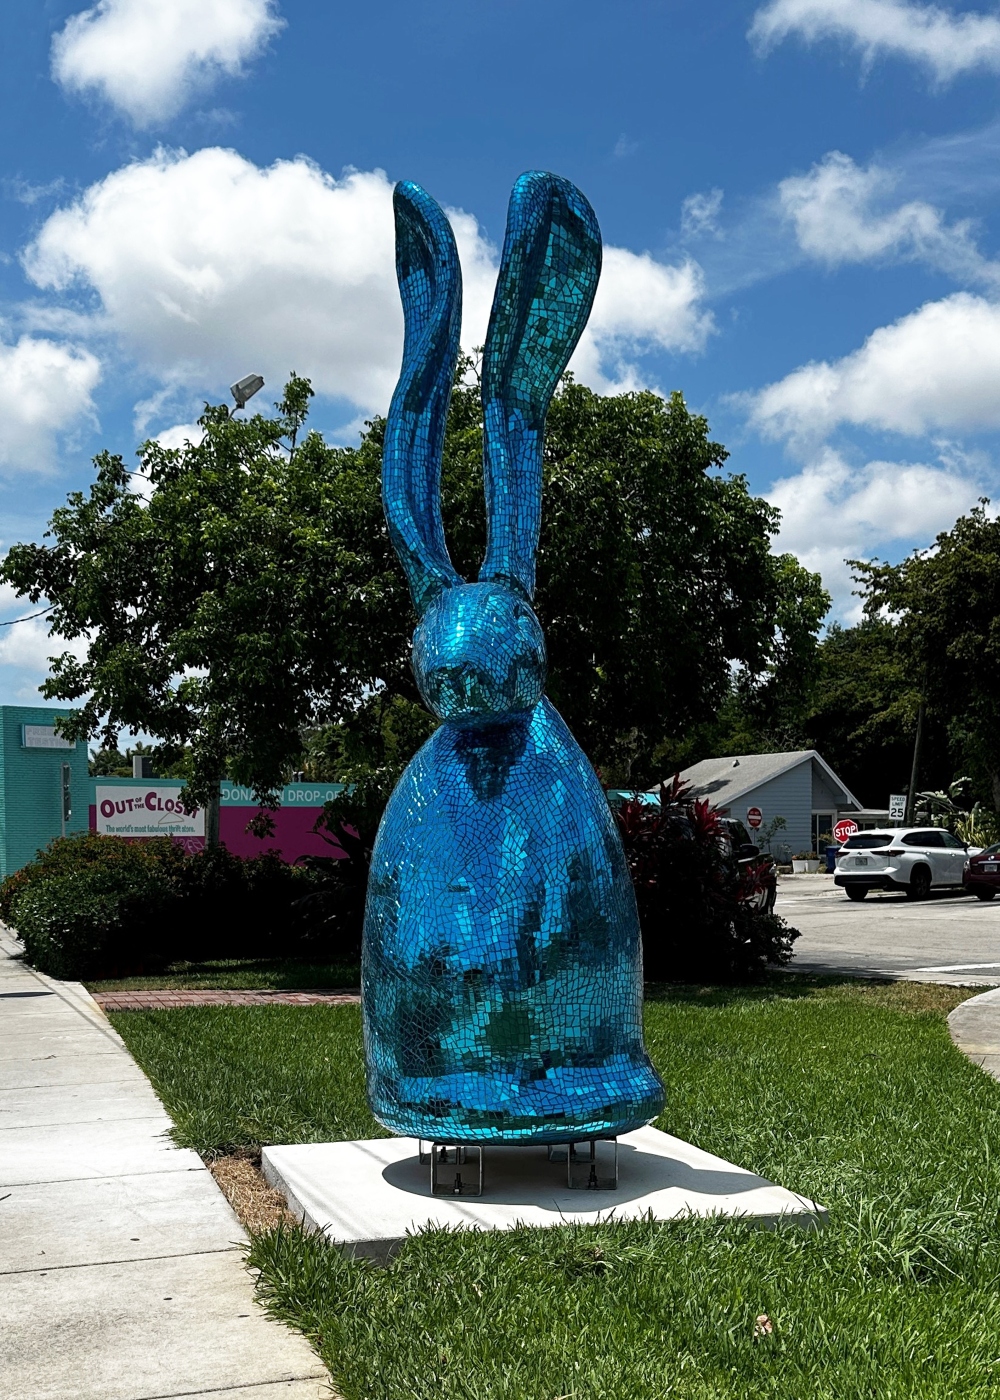 A Disgruntled Florida Man Just Plowed His Car Into a $200,000 Blue Bunny Sculpture—His Second Time Vandalizing Public Art